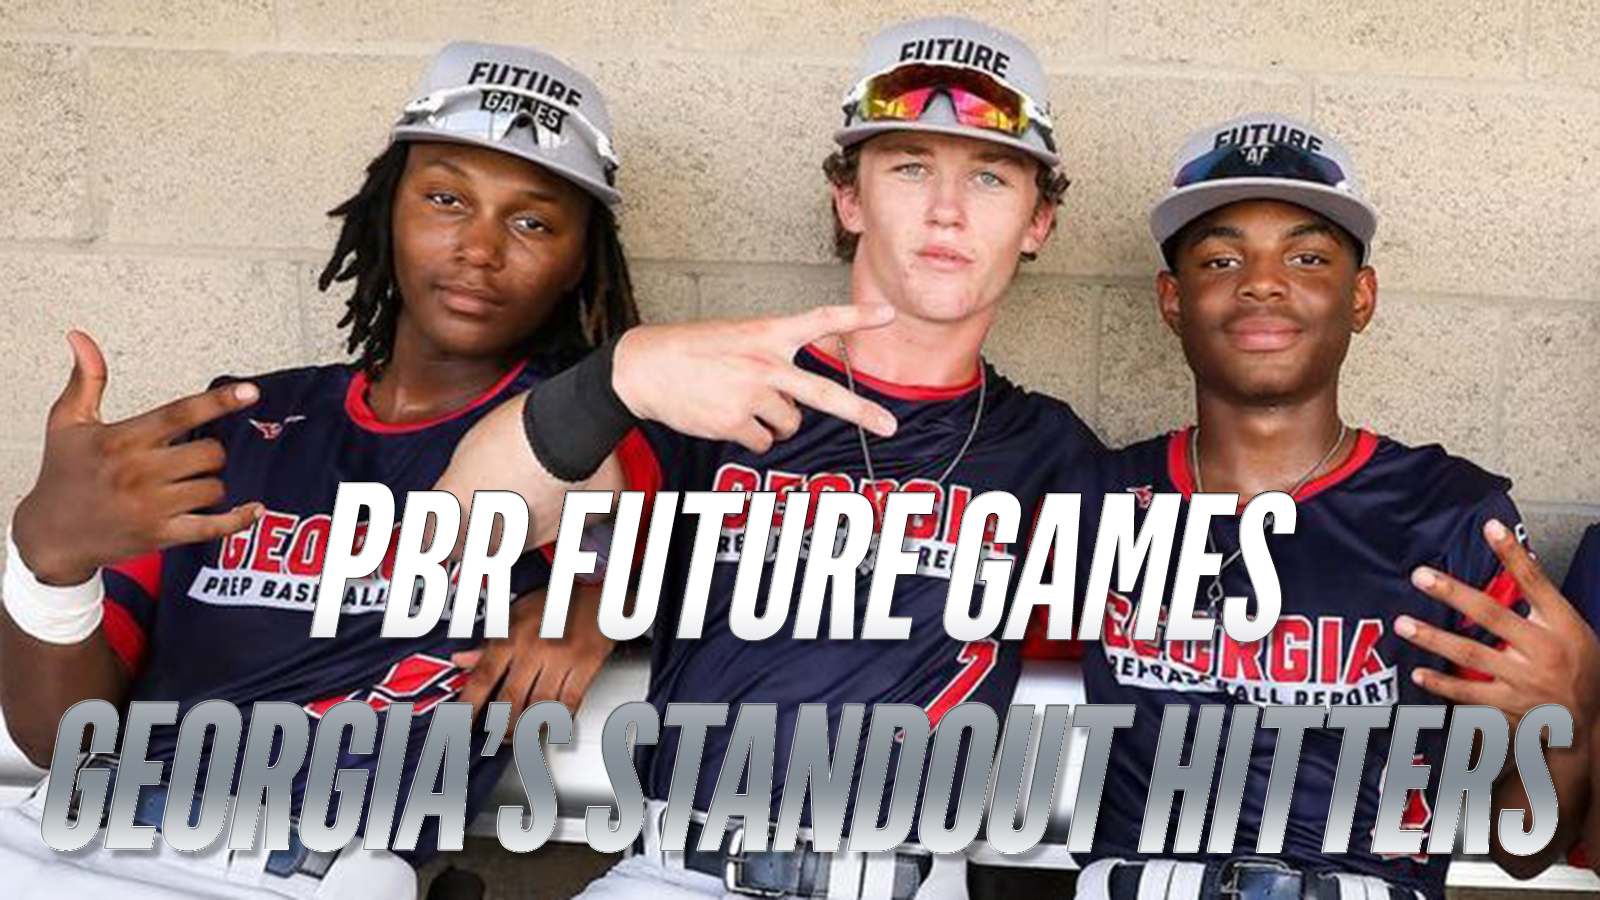 PBR Future Games Team standout hitters LakePoint Sports